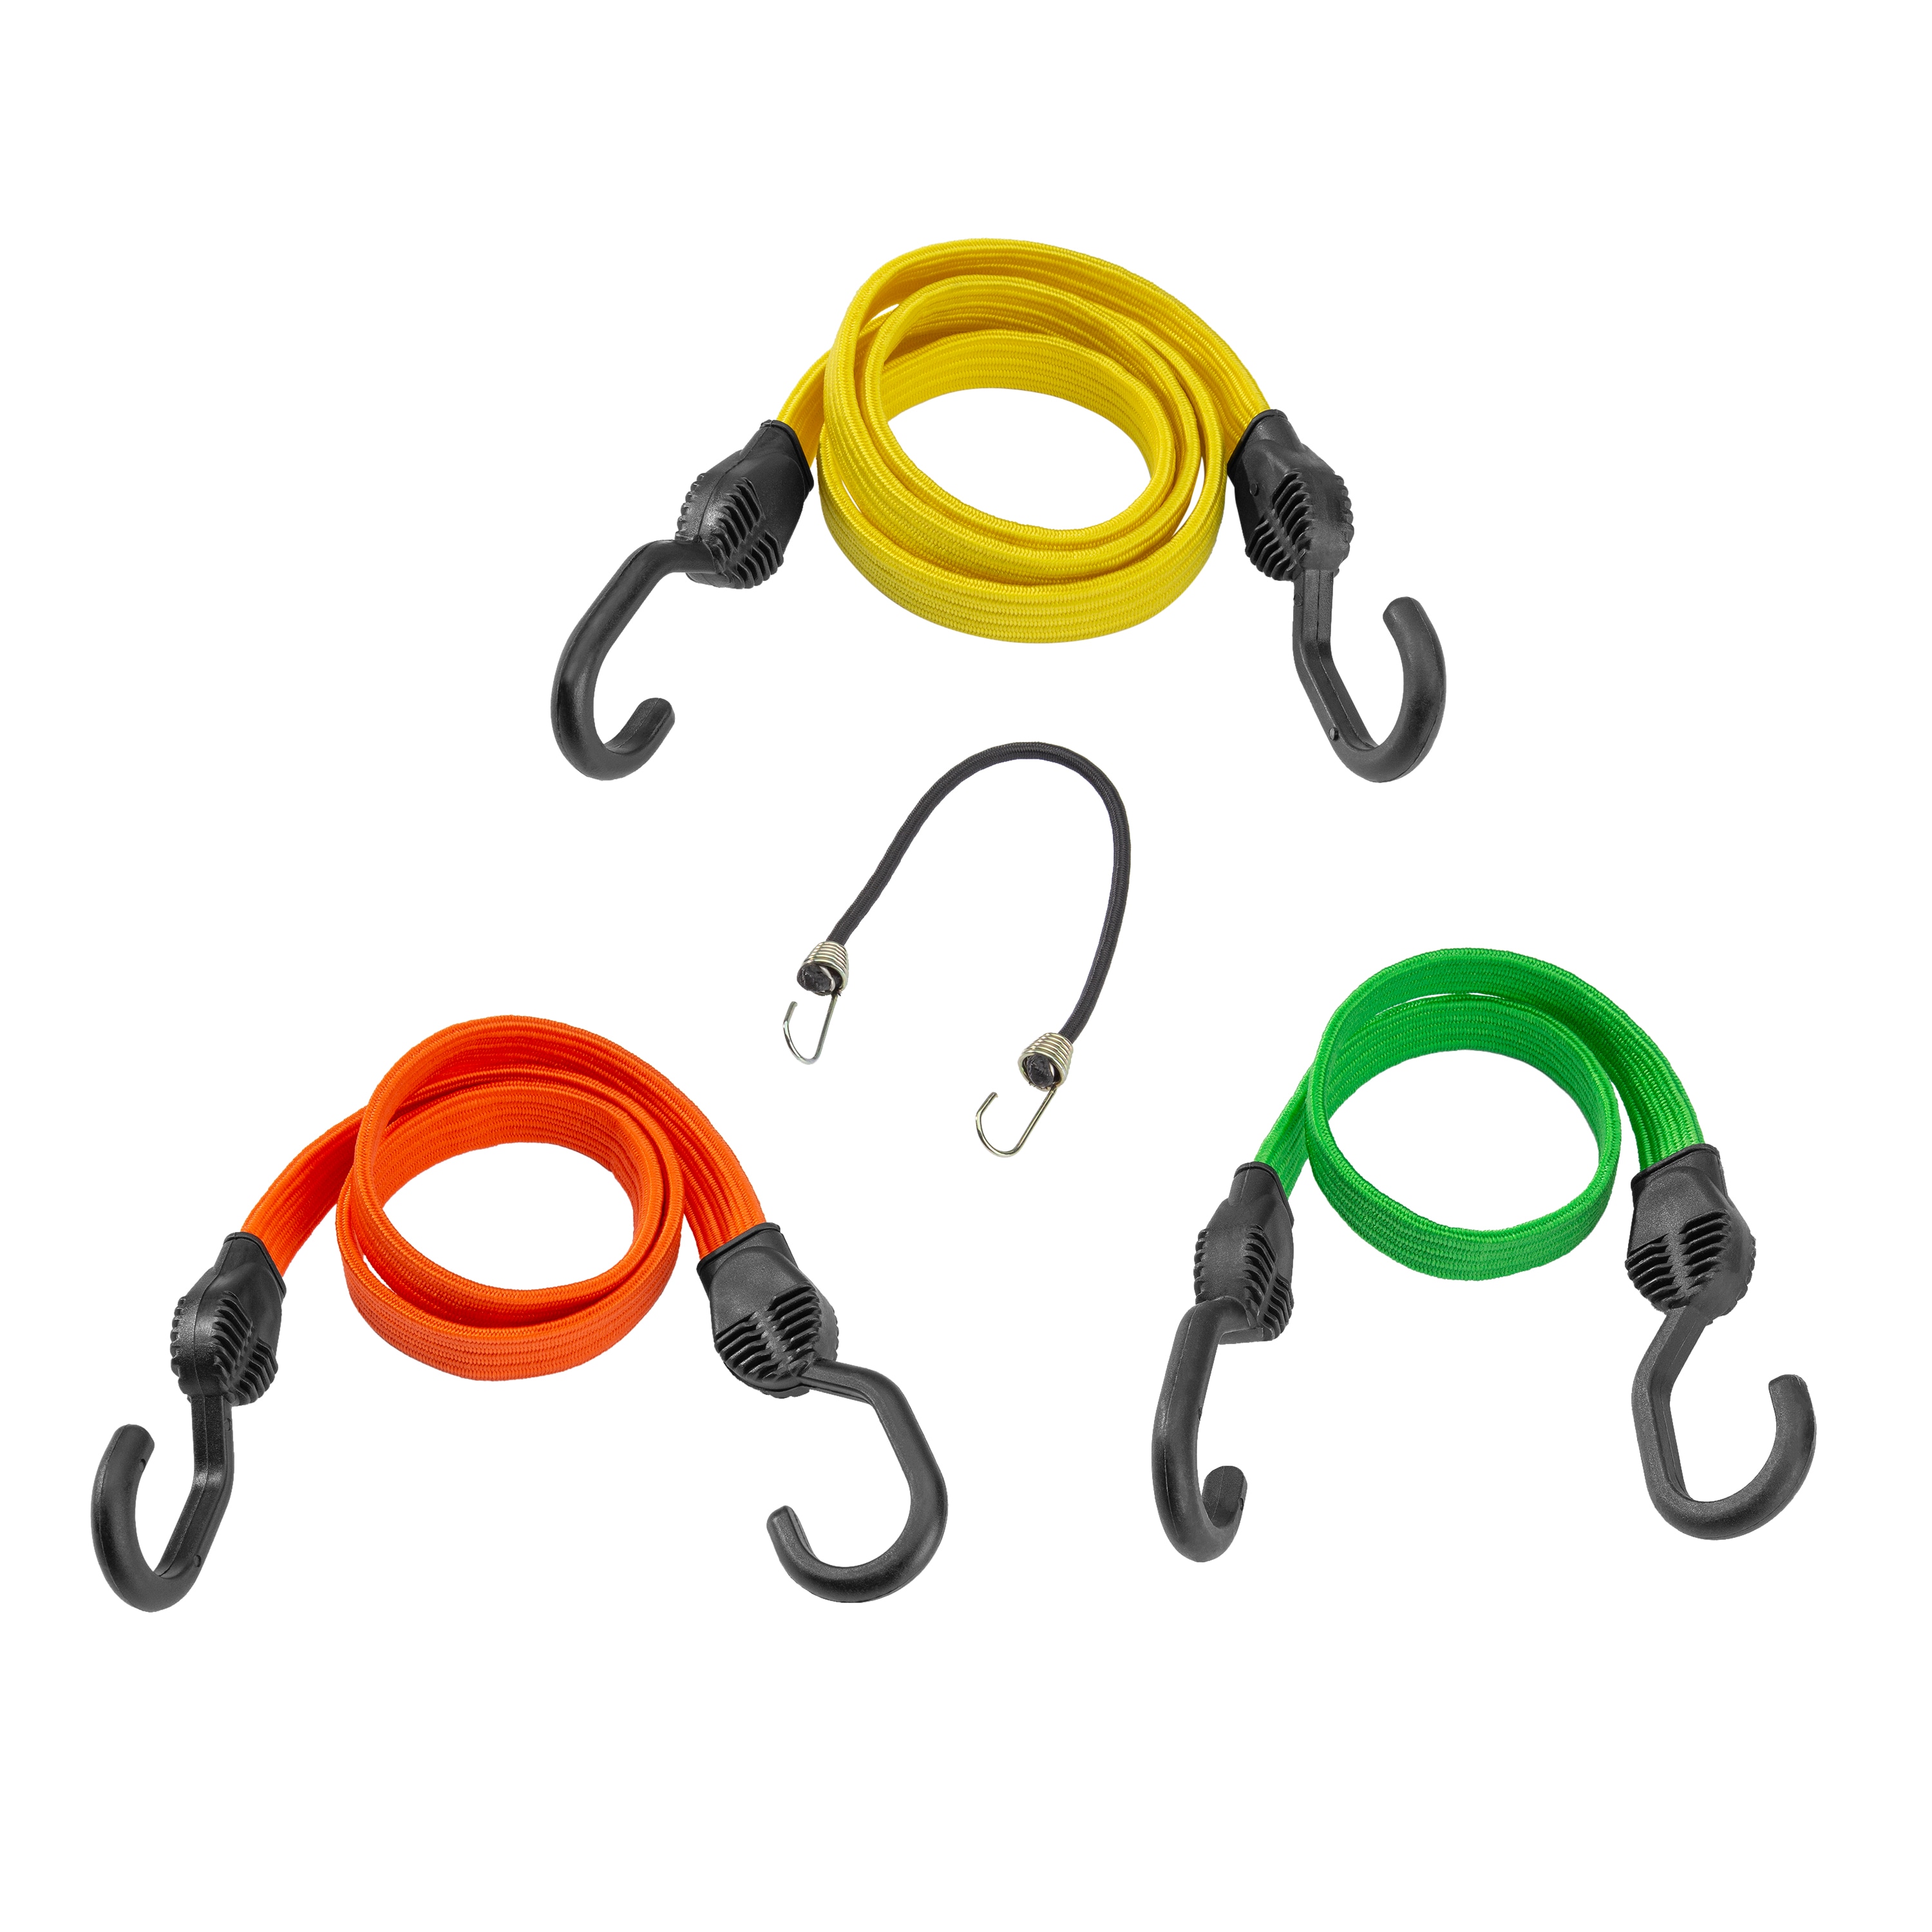 Coghlans Bungee Stretch Cords – Good's Store Online